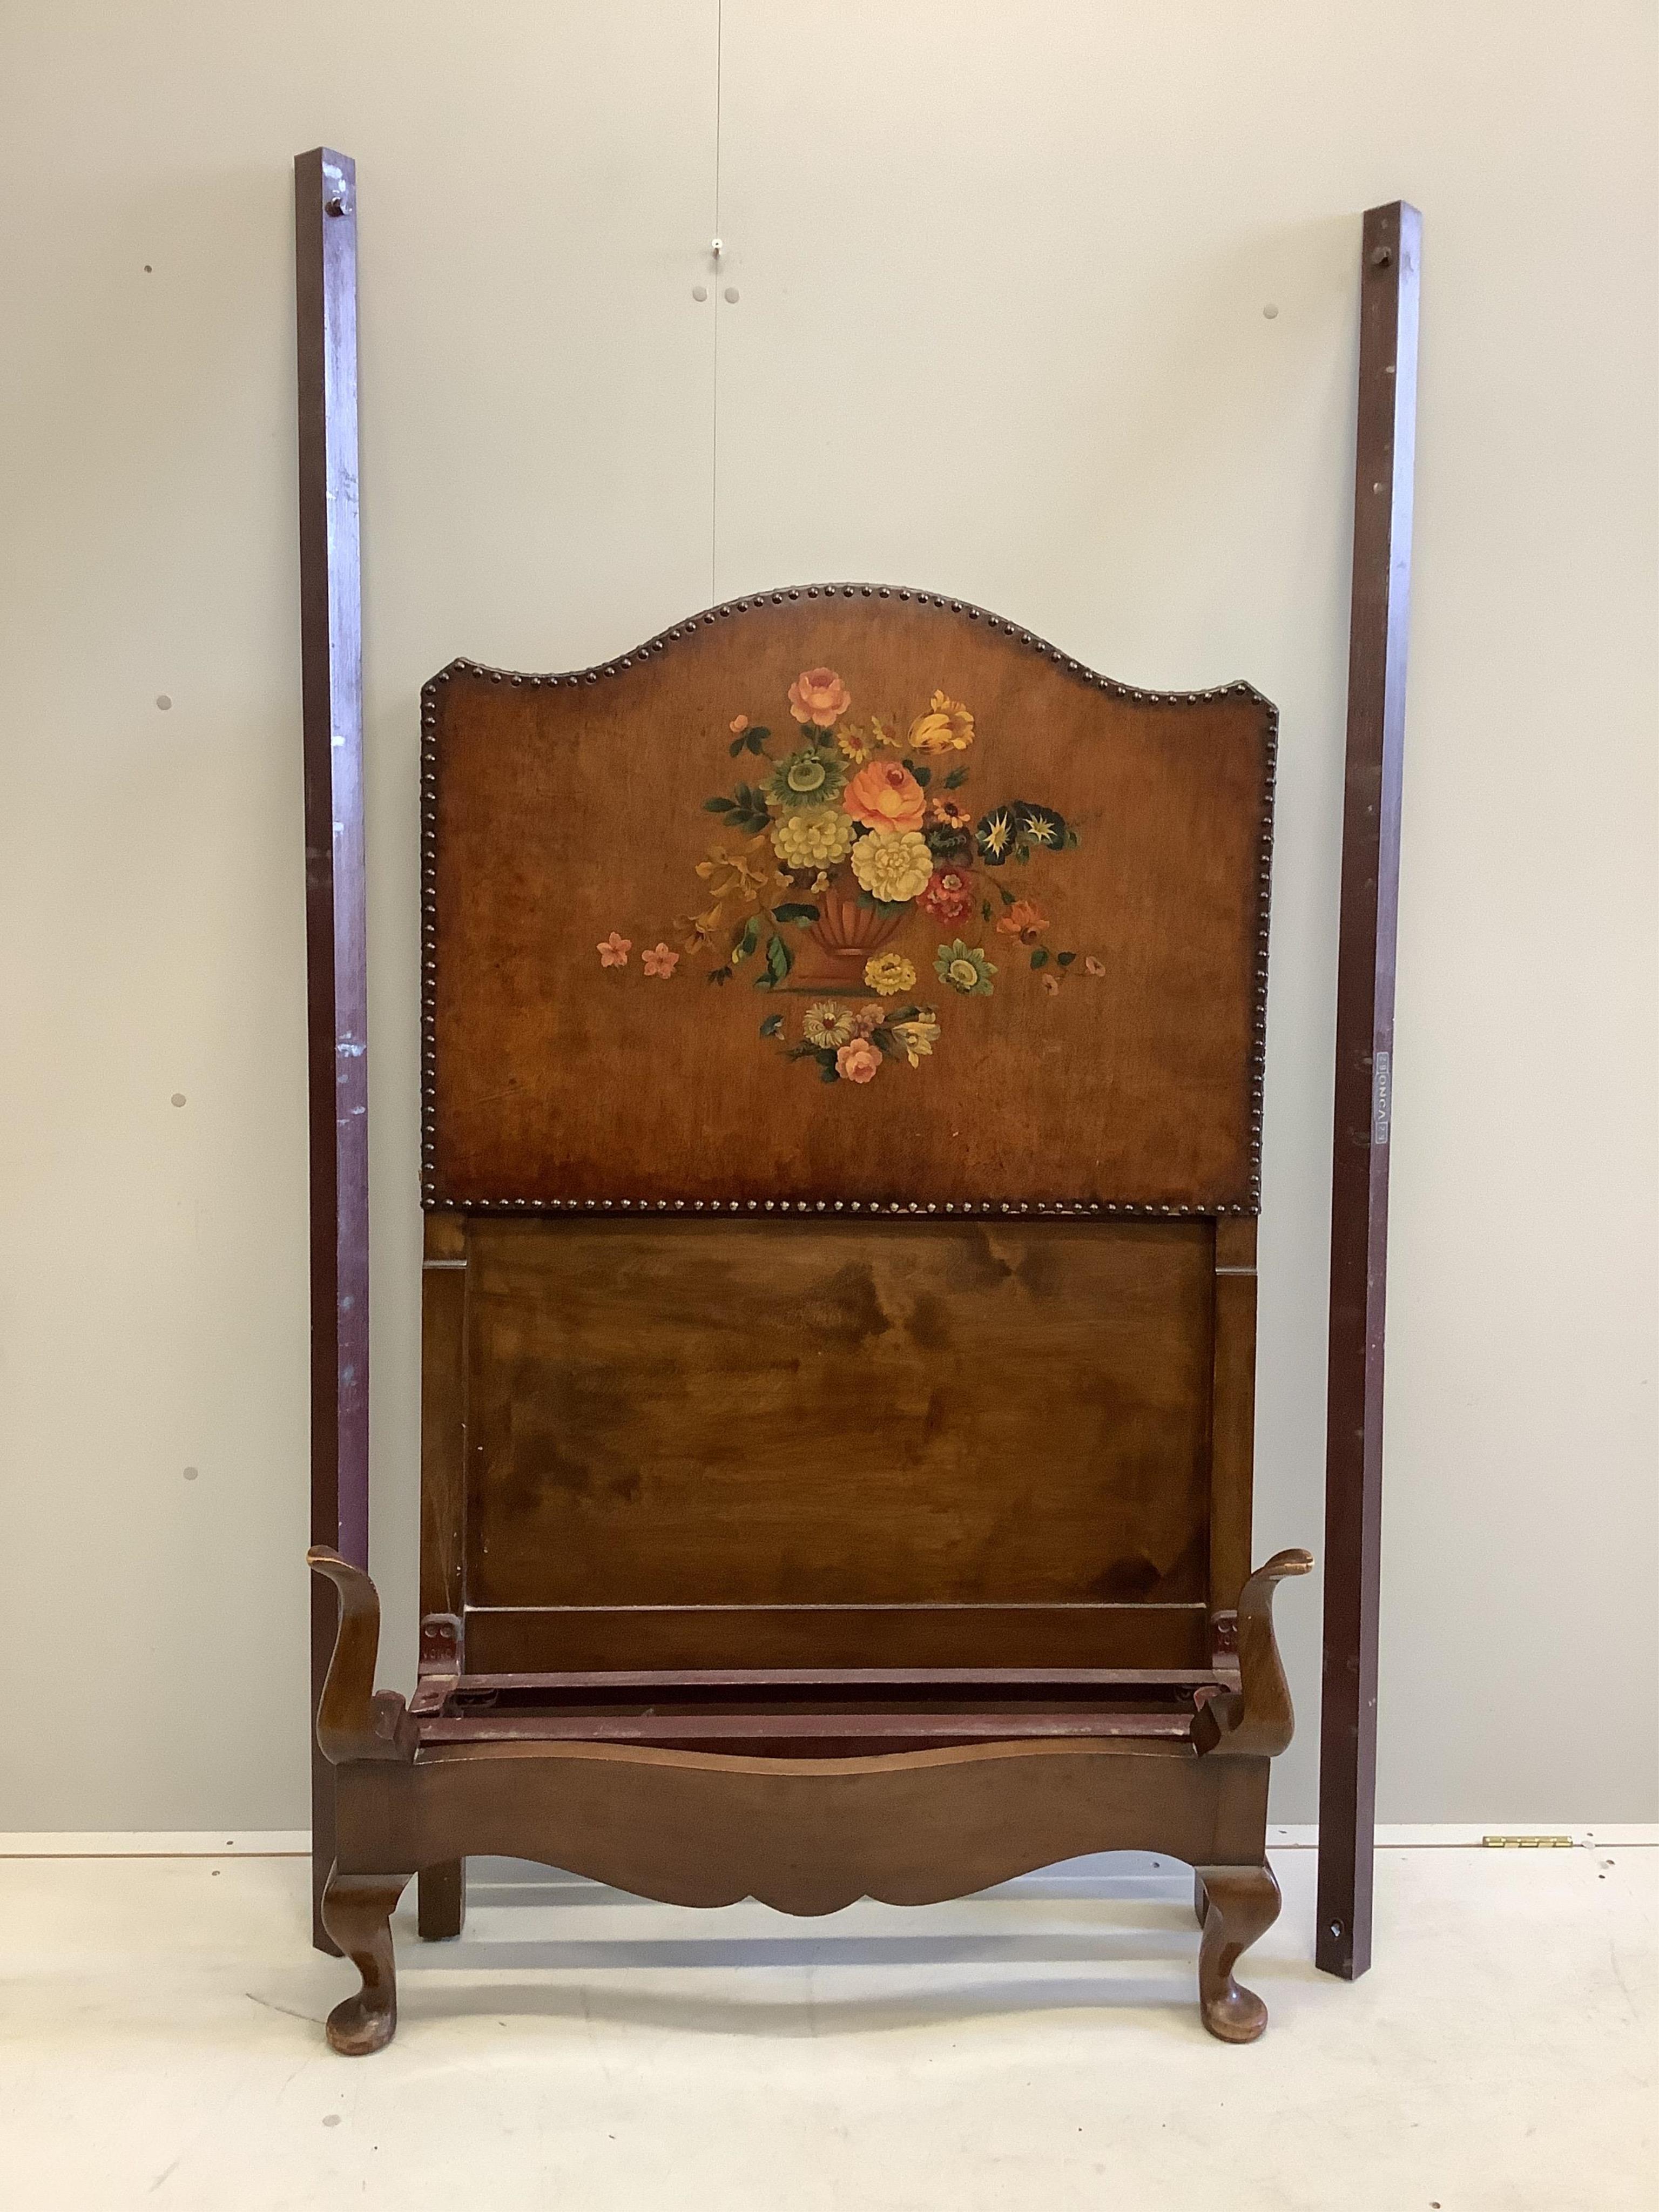 An early 20th century painted and studded leather single bedframe, length 204cm, width 92cm, height 148cm. Condition - good